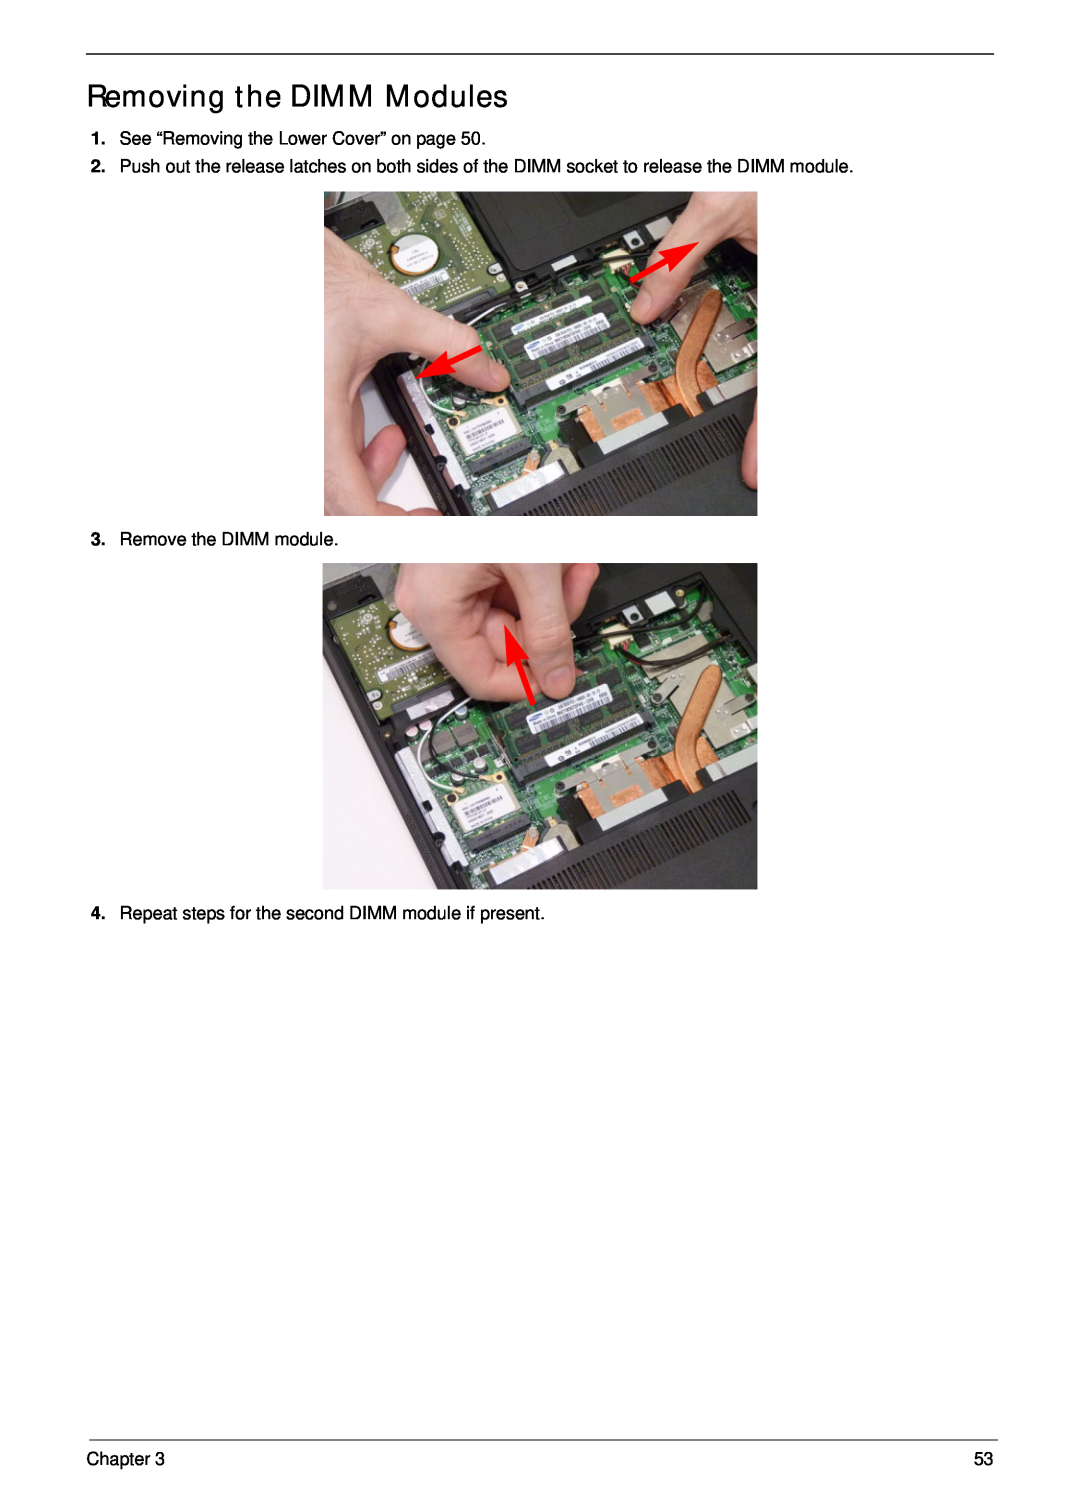 Aspire Digital 4625 Removing the DIMM Modules, See “Removing the Lower Cover” on page, Remove the DIMM module, Chapter 